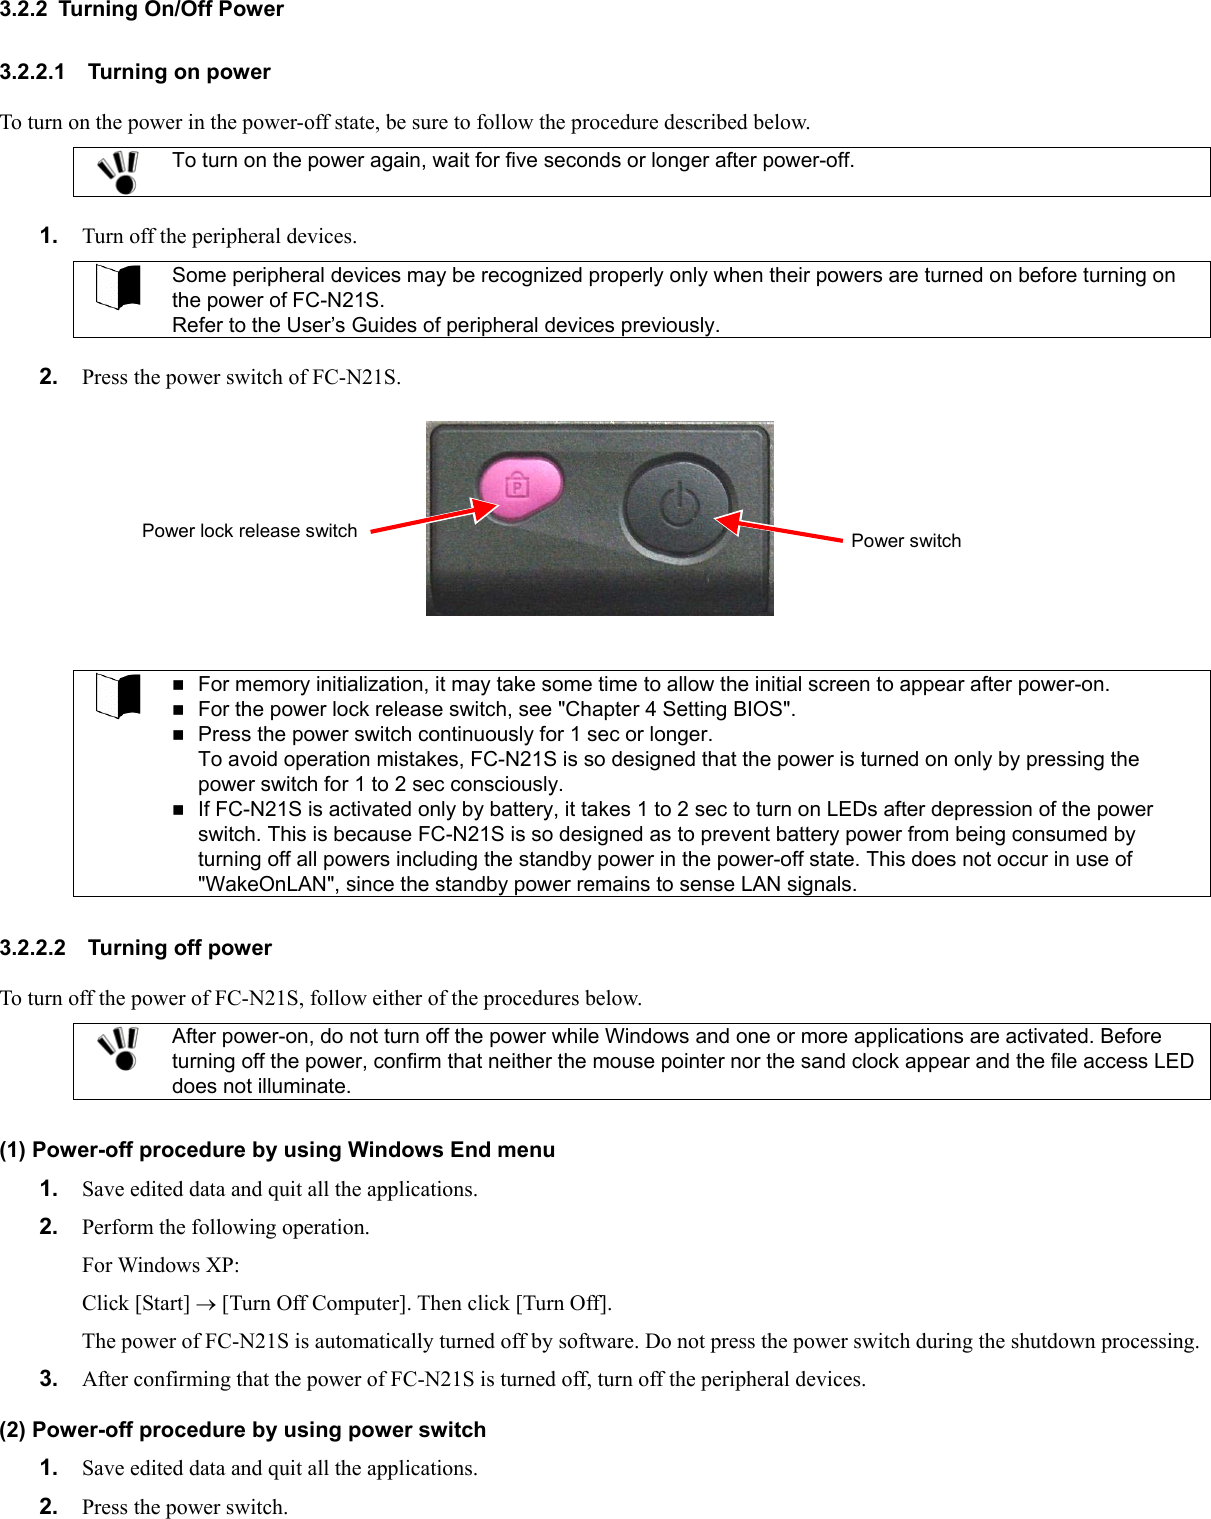 3.2.2  Turning On/Off Power 3.2.2.1 Turning on power To turn on the power in the power-off state, be sure to follow the procedure described below.  To turn on the power again, wait for five seconds or longer after power-off.  1.  Turn off the peripheral devices.  Some peripheral devices may be recognized properly only when their powers are turned on before turning on the power of FC-N21S. Refer to the User’s Guides of peripheral devices previously.  2.  Press the power switch of FC-N21S. Power lock release switch  Power switch    For memory initialization, it may take some time to allow the initial screen to appear after power-on.  For the power lock release switch, see &quot;Chapter 4 Setting BIOS&quot;.  Press the power switch continuously for 1 sec or longer. To avoid operation mistakes, FC-N21S is so designed that the power is turned on only by pressing the power switch for 1 to 2 sec consciously.  If FC-N21S is activated only by battery, it takes 1 to 2 sec to turn on LEDs after depression of the power switch. This is because FC-N21S is so designed as to prevent battery power from being consumed by turning off all powers including the standby power in the power-off state. This does not occur in use of &quot;WakeOnLAN&quot;, since the standby power remains to sense LAN signals.  3.2.2.2 Turning off power To turn off the power of FC-N21S, follow either of the procedures below.  After power-on, do not turn off the power while Windows and one or more applications are activated. Before turning off the power, confirm that neither the mouse pointer nor the sand clock appear and the file access LED does not illuminate.  (1) Power-off procedure by using Windows End menu 1.  Save edited data and quit all the applications. 2.  Perform the following operation. For Windows XP: Click [Start] → [Turn Off Computer]. Then click [Turn Off]. The power of FC-N21S is automatically turned off by software. Do not press the power switch during the shutdown processing. 3.  After confirming that the power of FC-N21S is turned off, turn off the peripheral devices. (2) Power-off procedure by using power switch 1.  Save edited data and quit all the applications. 2.  Press the power switch. 